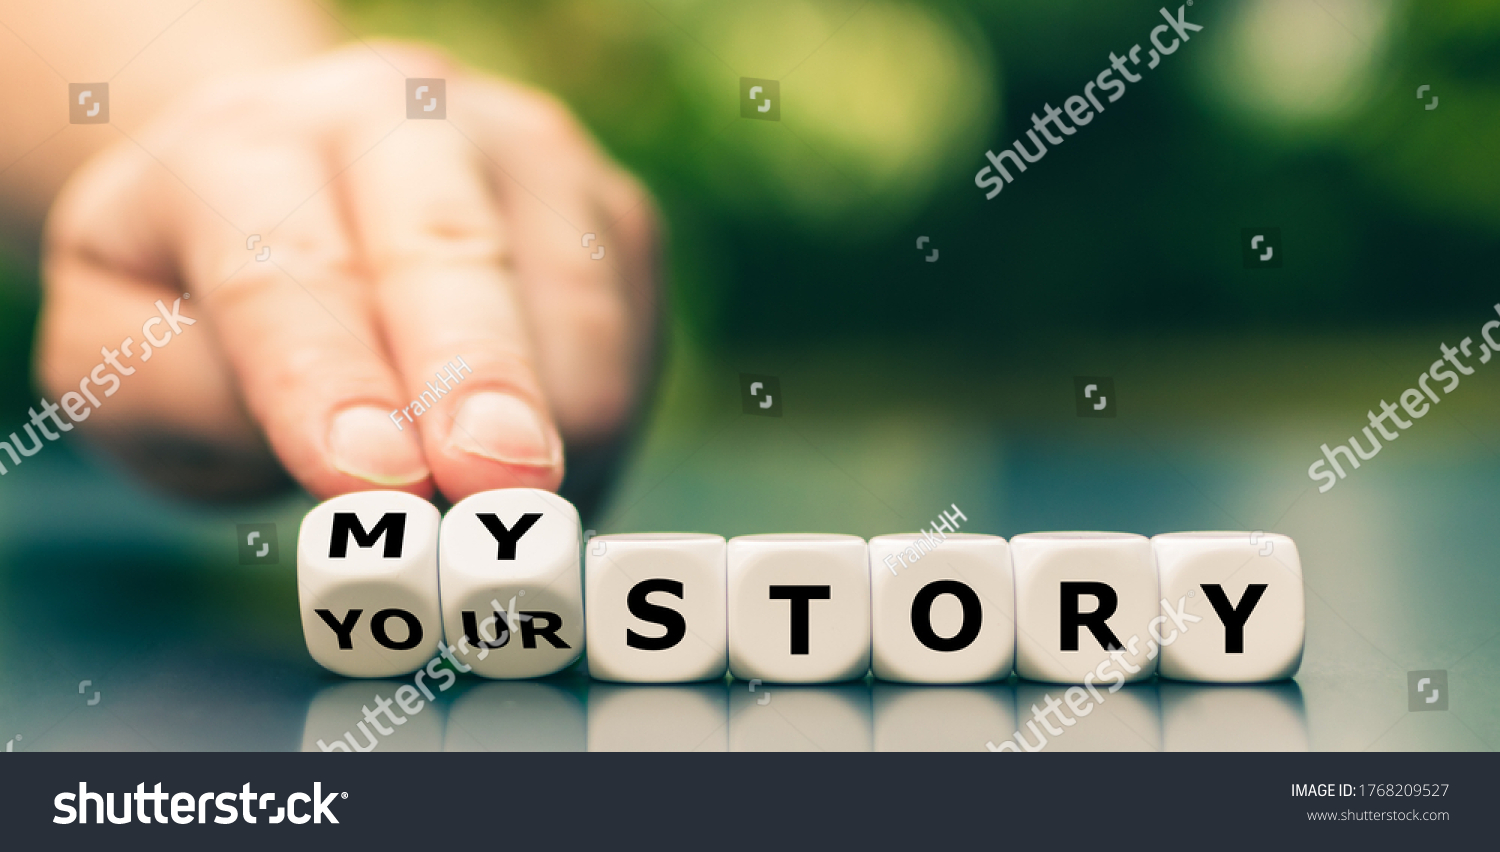 Hand turns dice and changes the expression "your story" to "my story". #1768209527